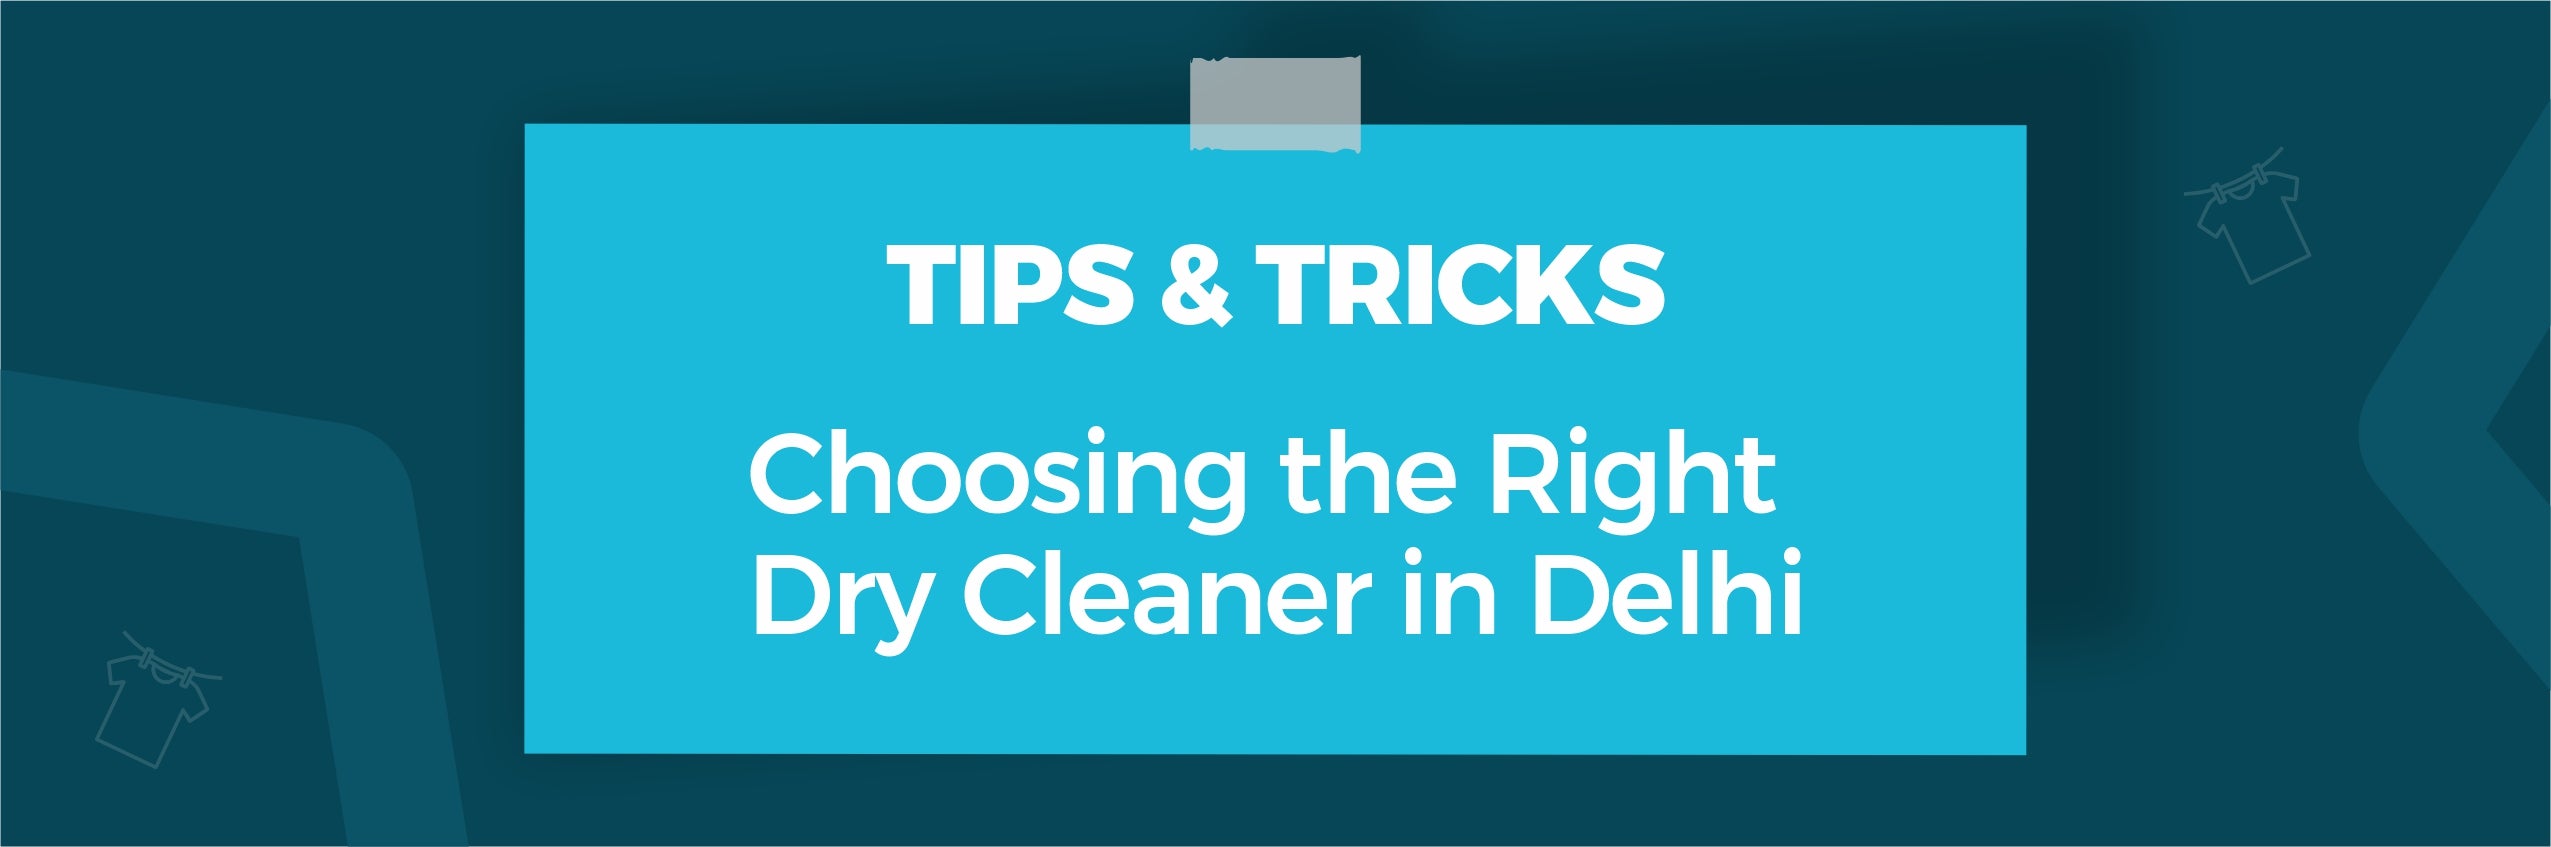 Choosing the Right Dry Cleaner in Delhi: Tips and Tricks